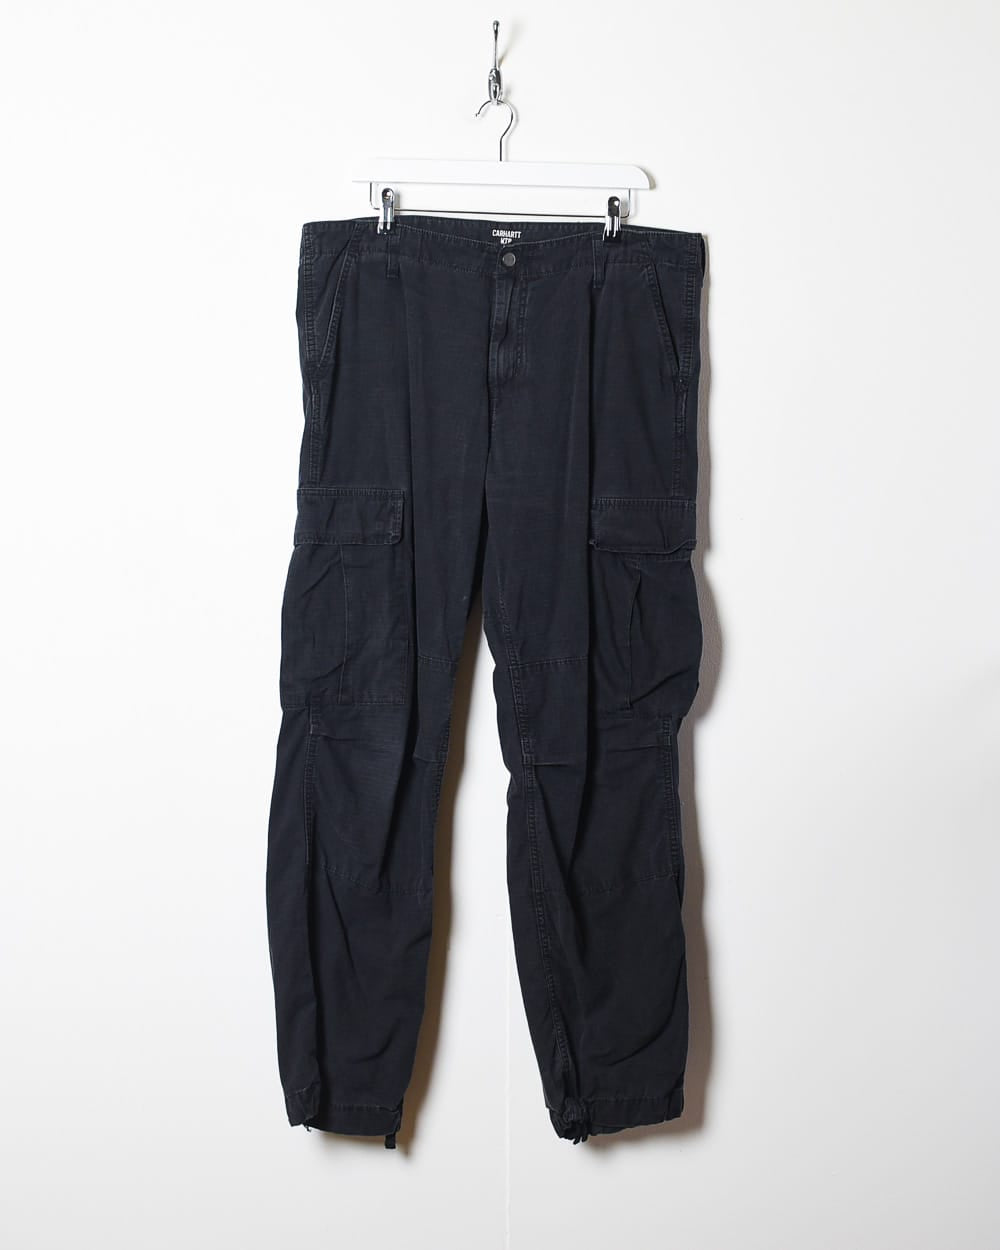 Cargo trousers – Domno Vintage